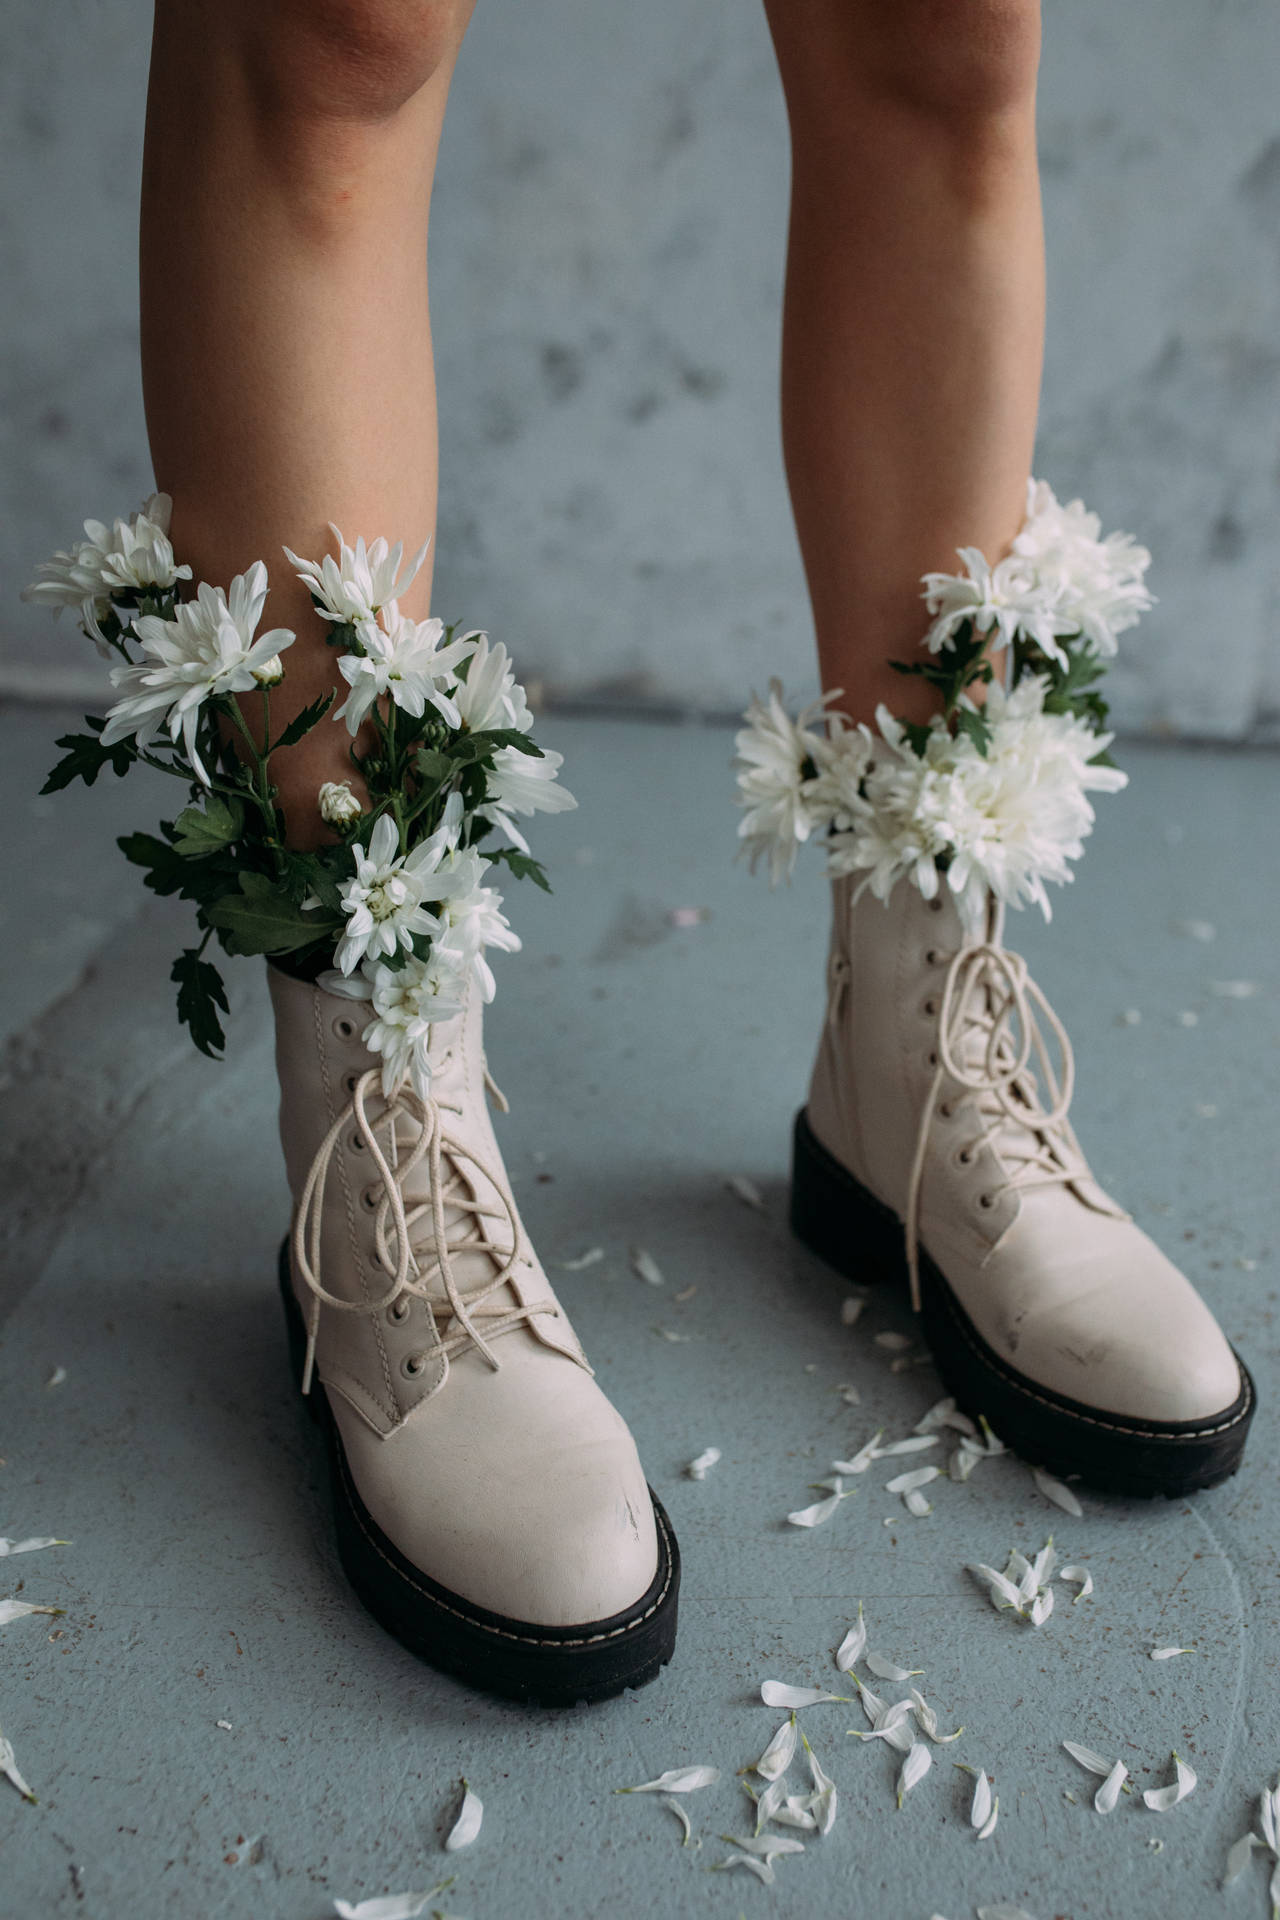 White Flowers On Boots Wallpaper